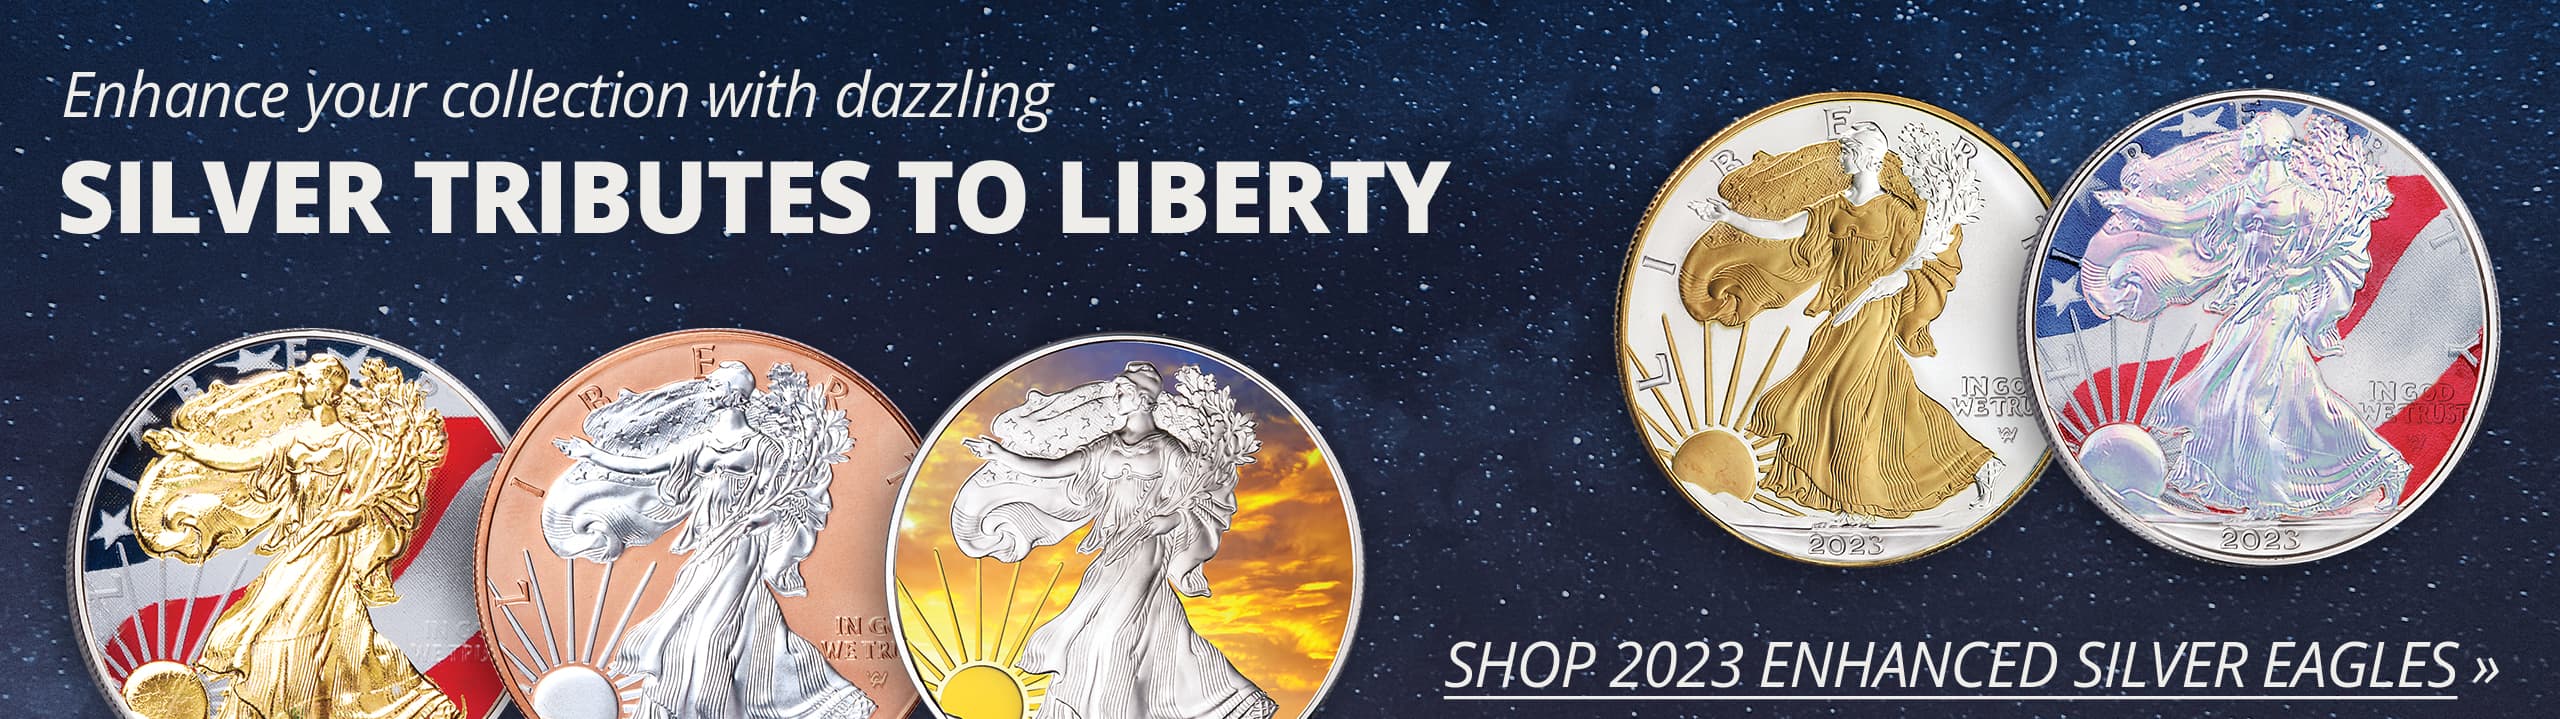 Enhance you collection with dazzling Silver Tributes to Liberty! Shop 2023 Enhanced Silver Eagles